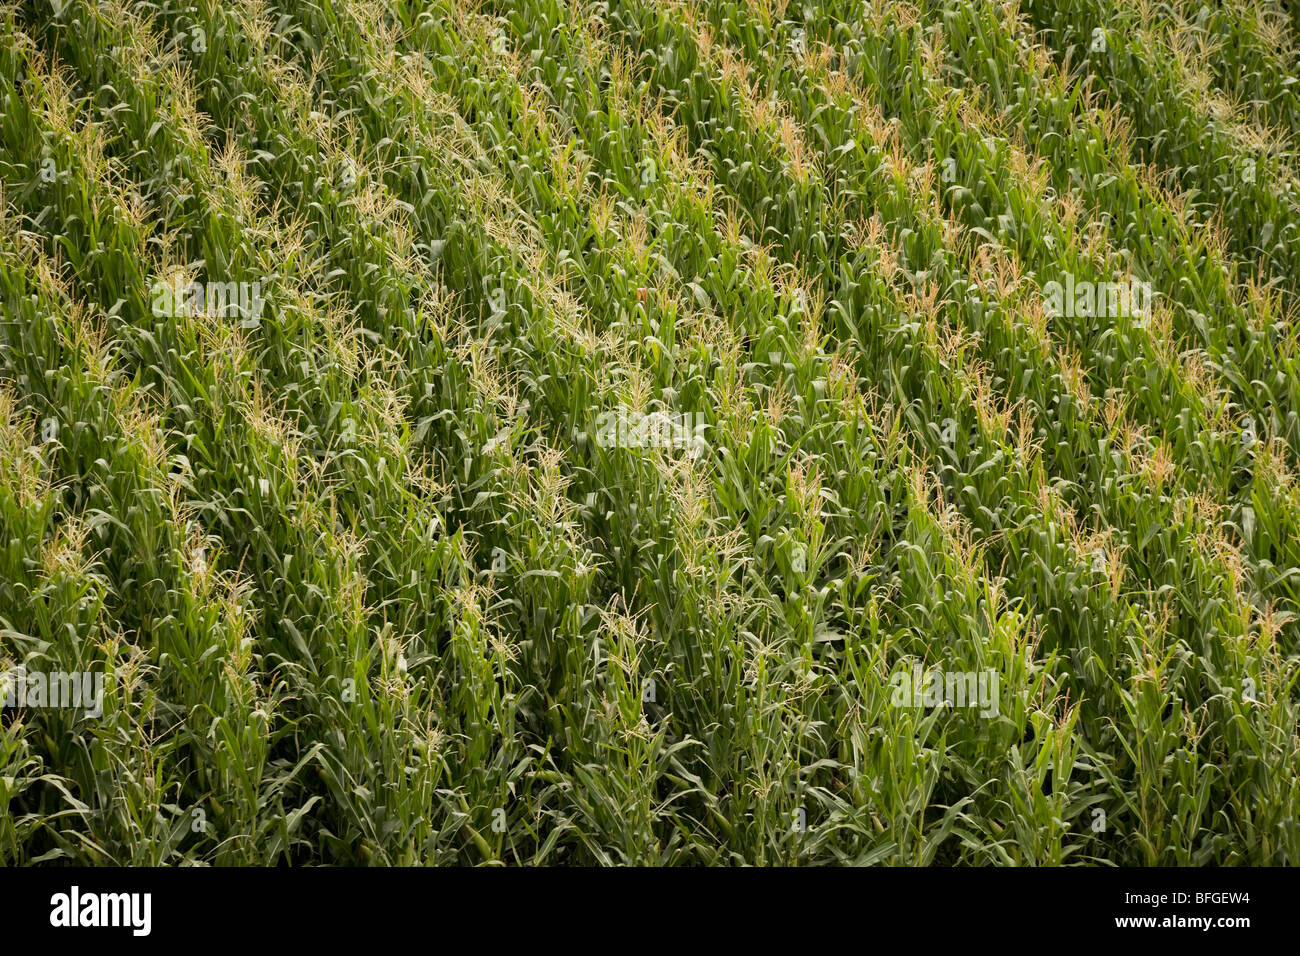 Aerial close up view of an American corn maize field with tassels in summer. Nebraska, Great Plains, USA Stock Photo